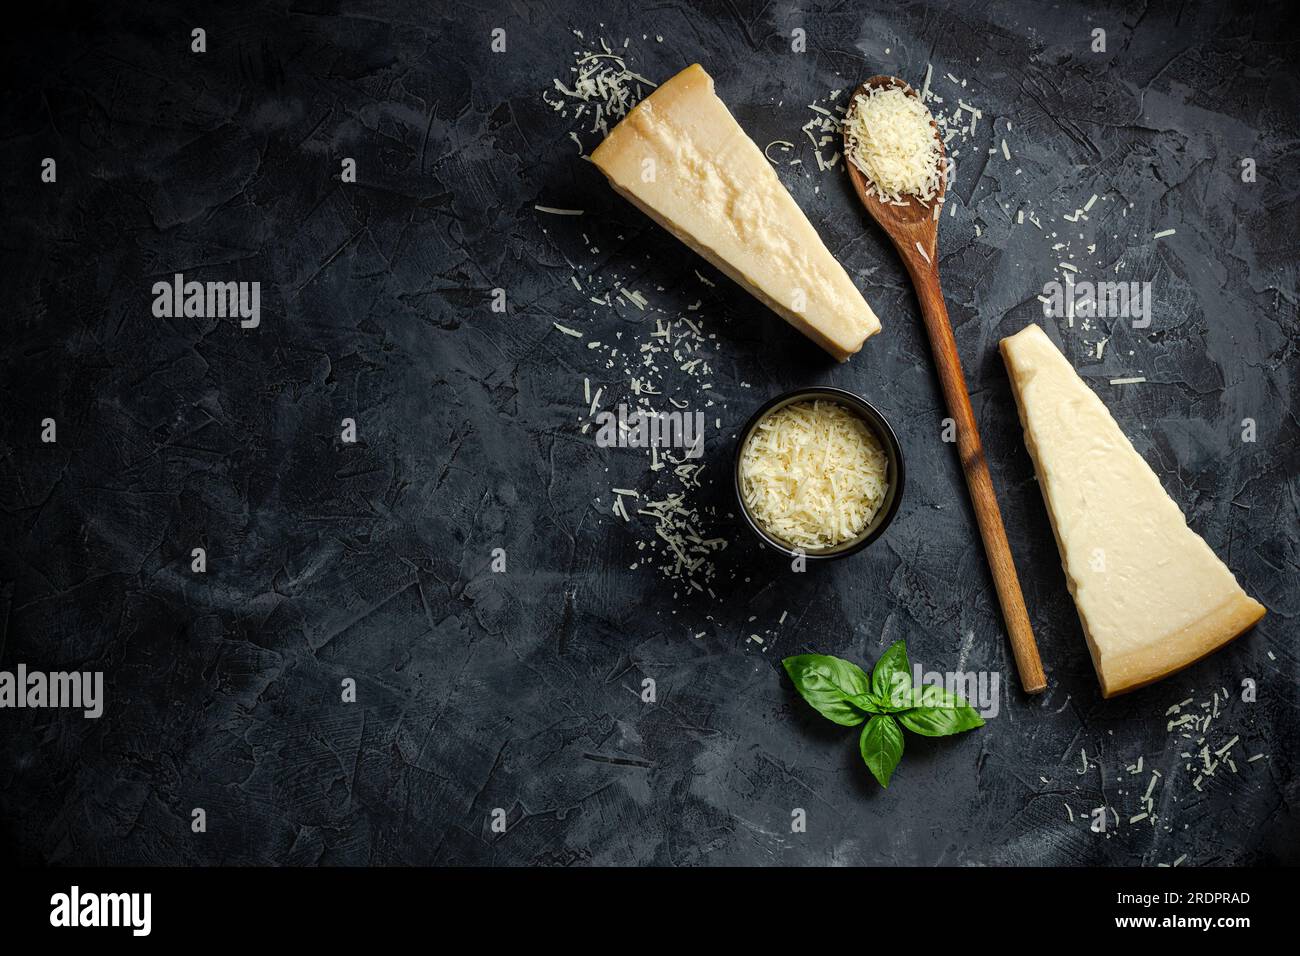 Set of hard cheeses with cheese knives on black stone background. Parmesan. Top view. Free space for your text. Stock Photo